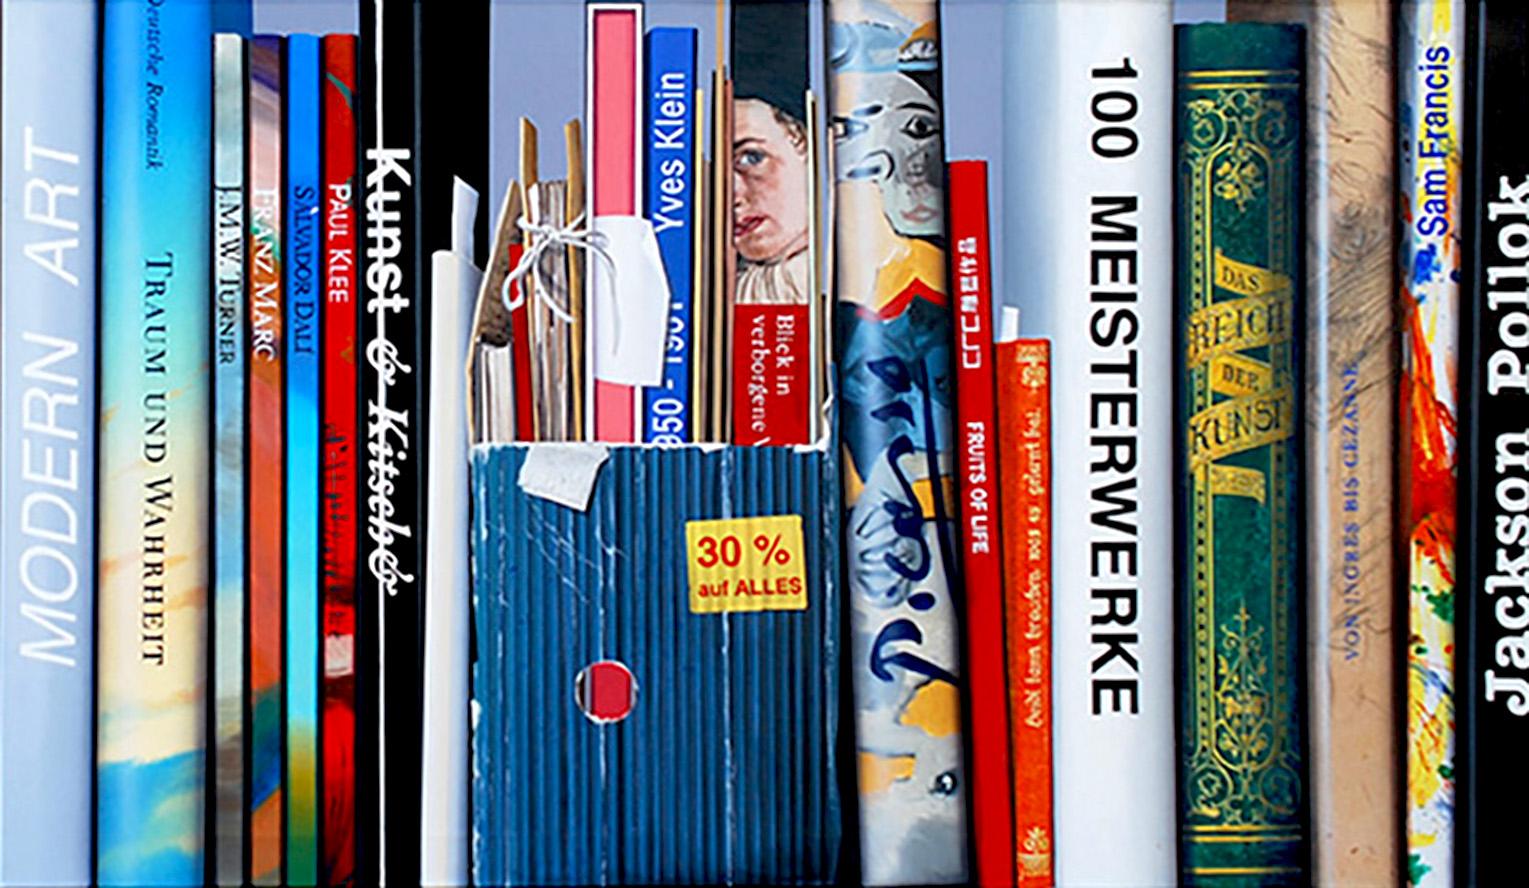 Book Collection by Kuno Vollet - Hyperrealist, Contemporary Painting